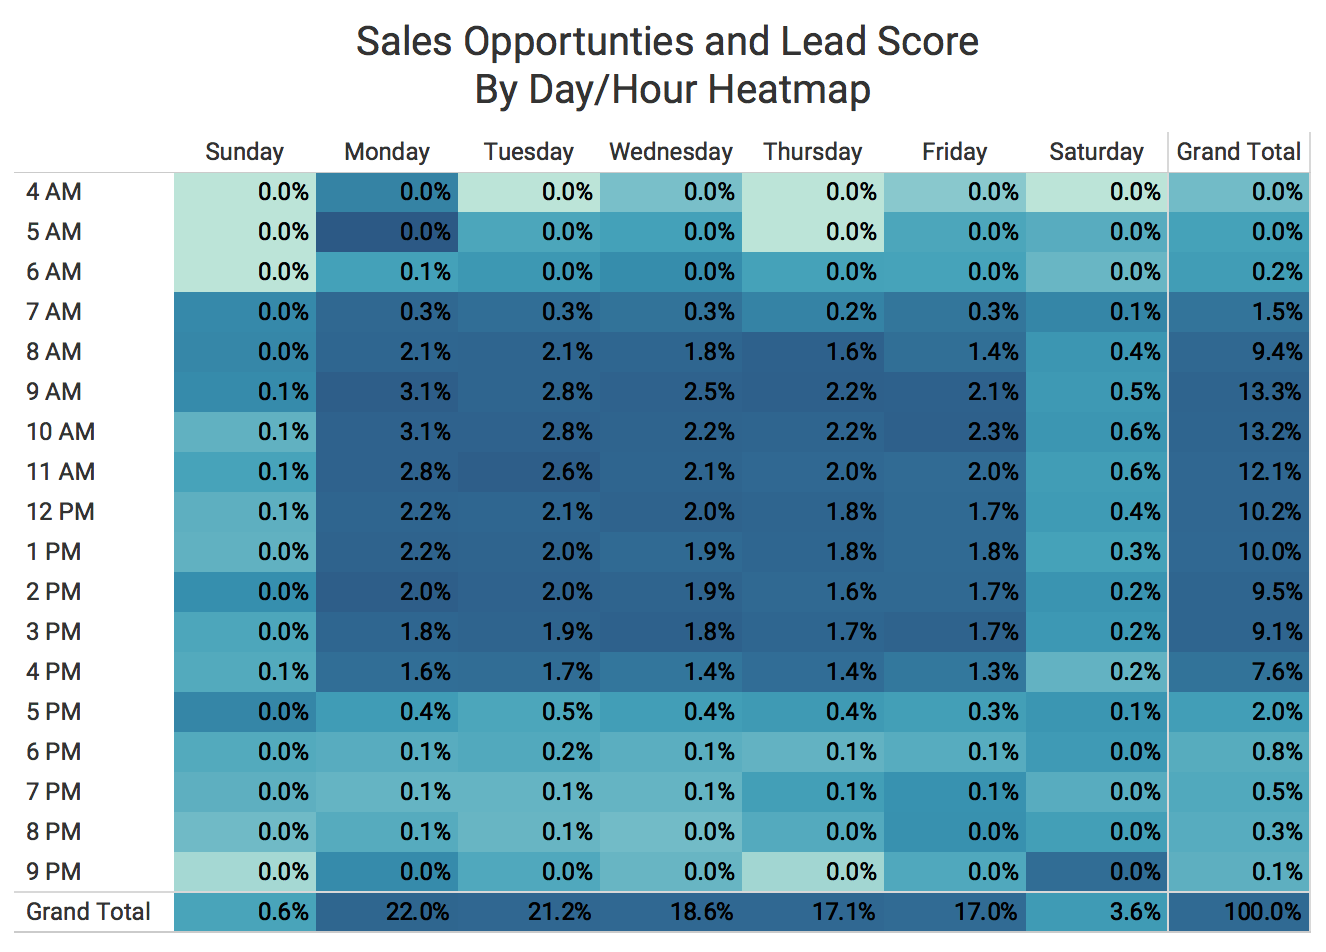 AI Call Reports sales opportunities lead score heatmap